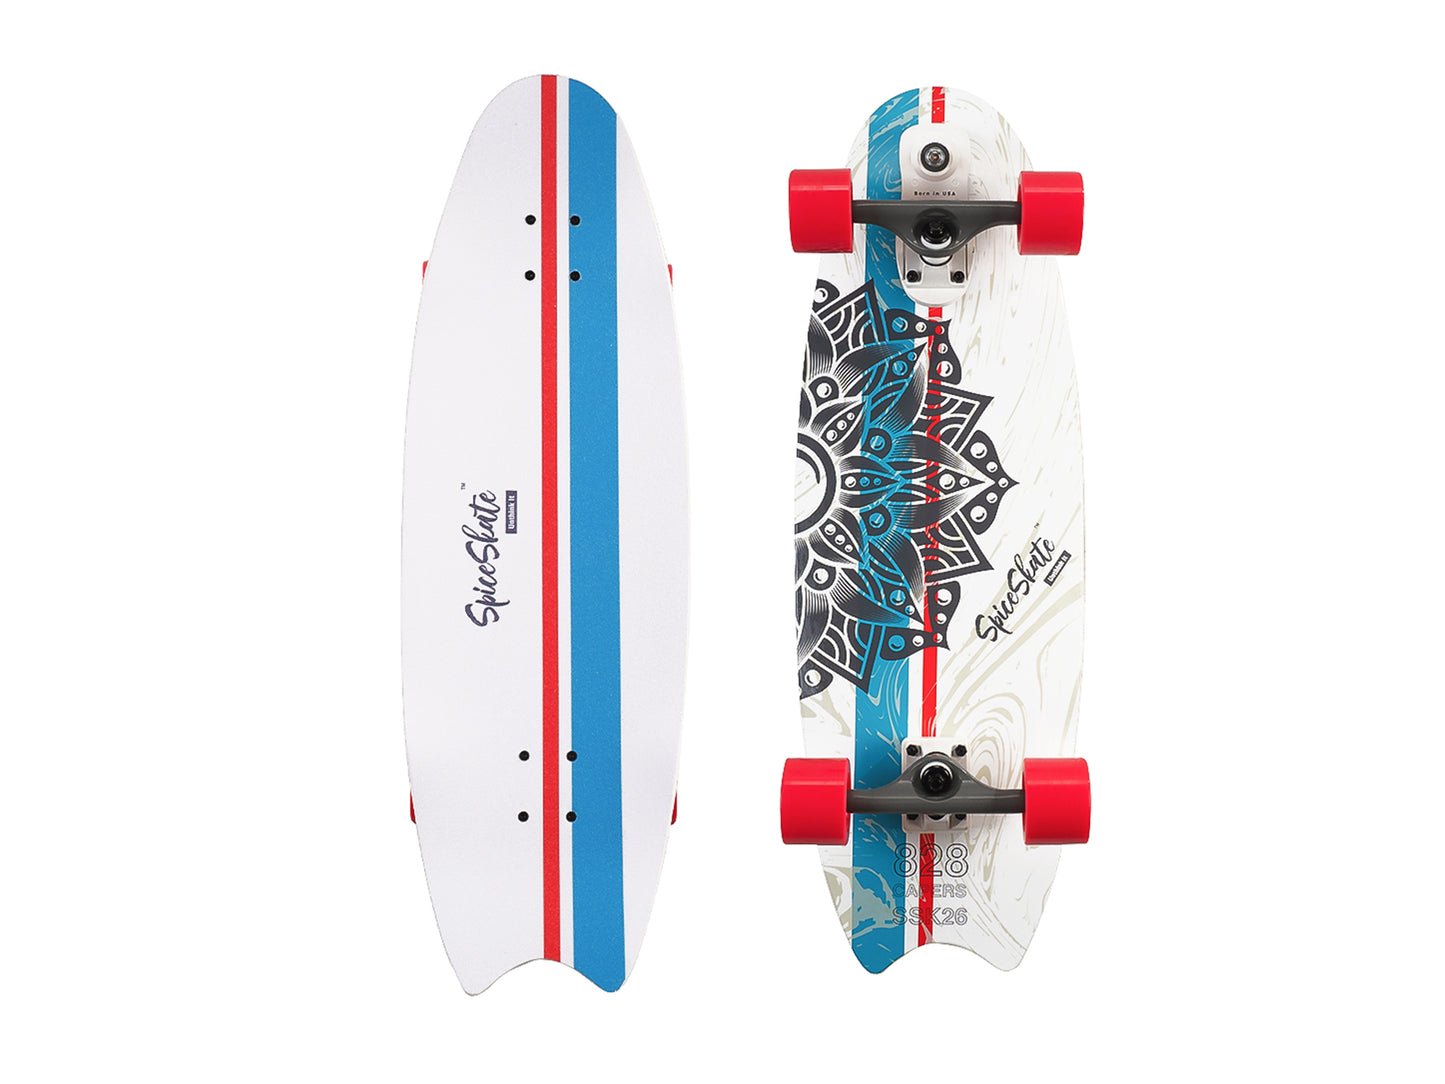 SpiceSkate SurfSkate Type S | CAPERS 828